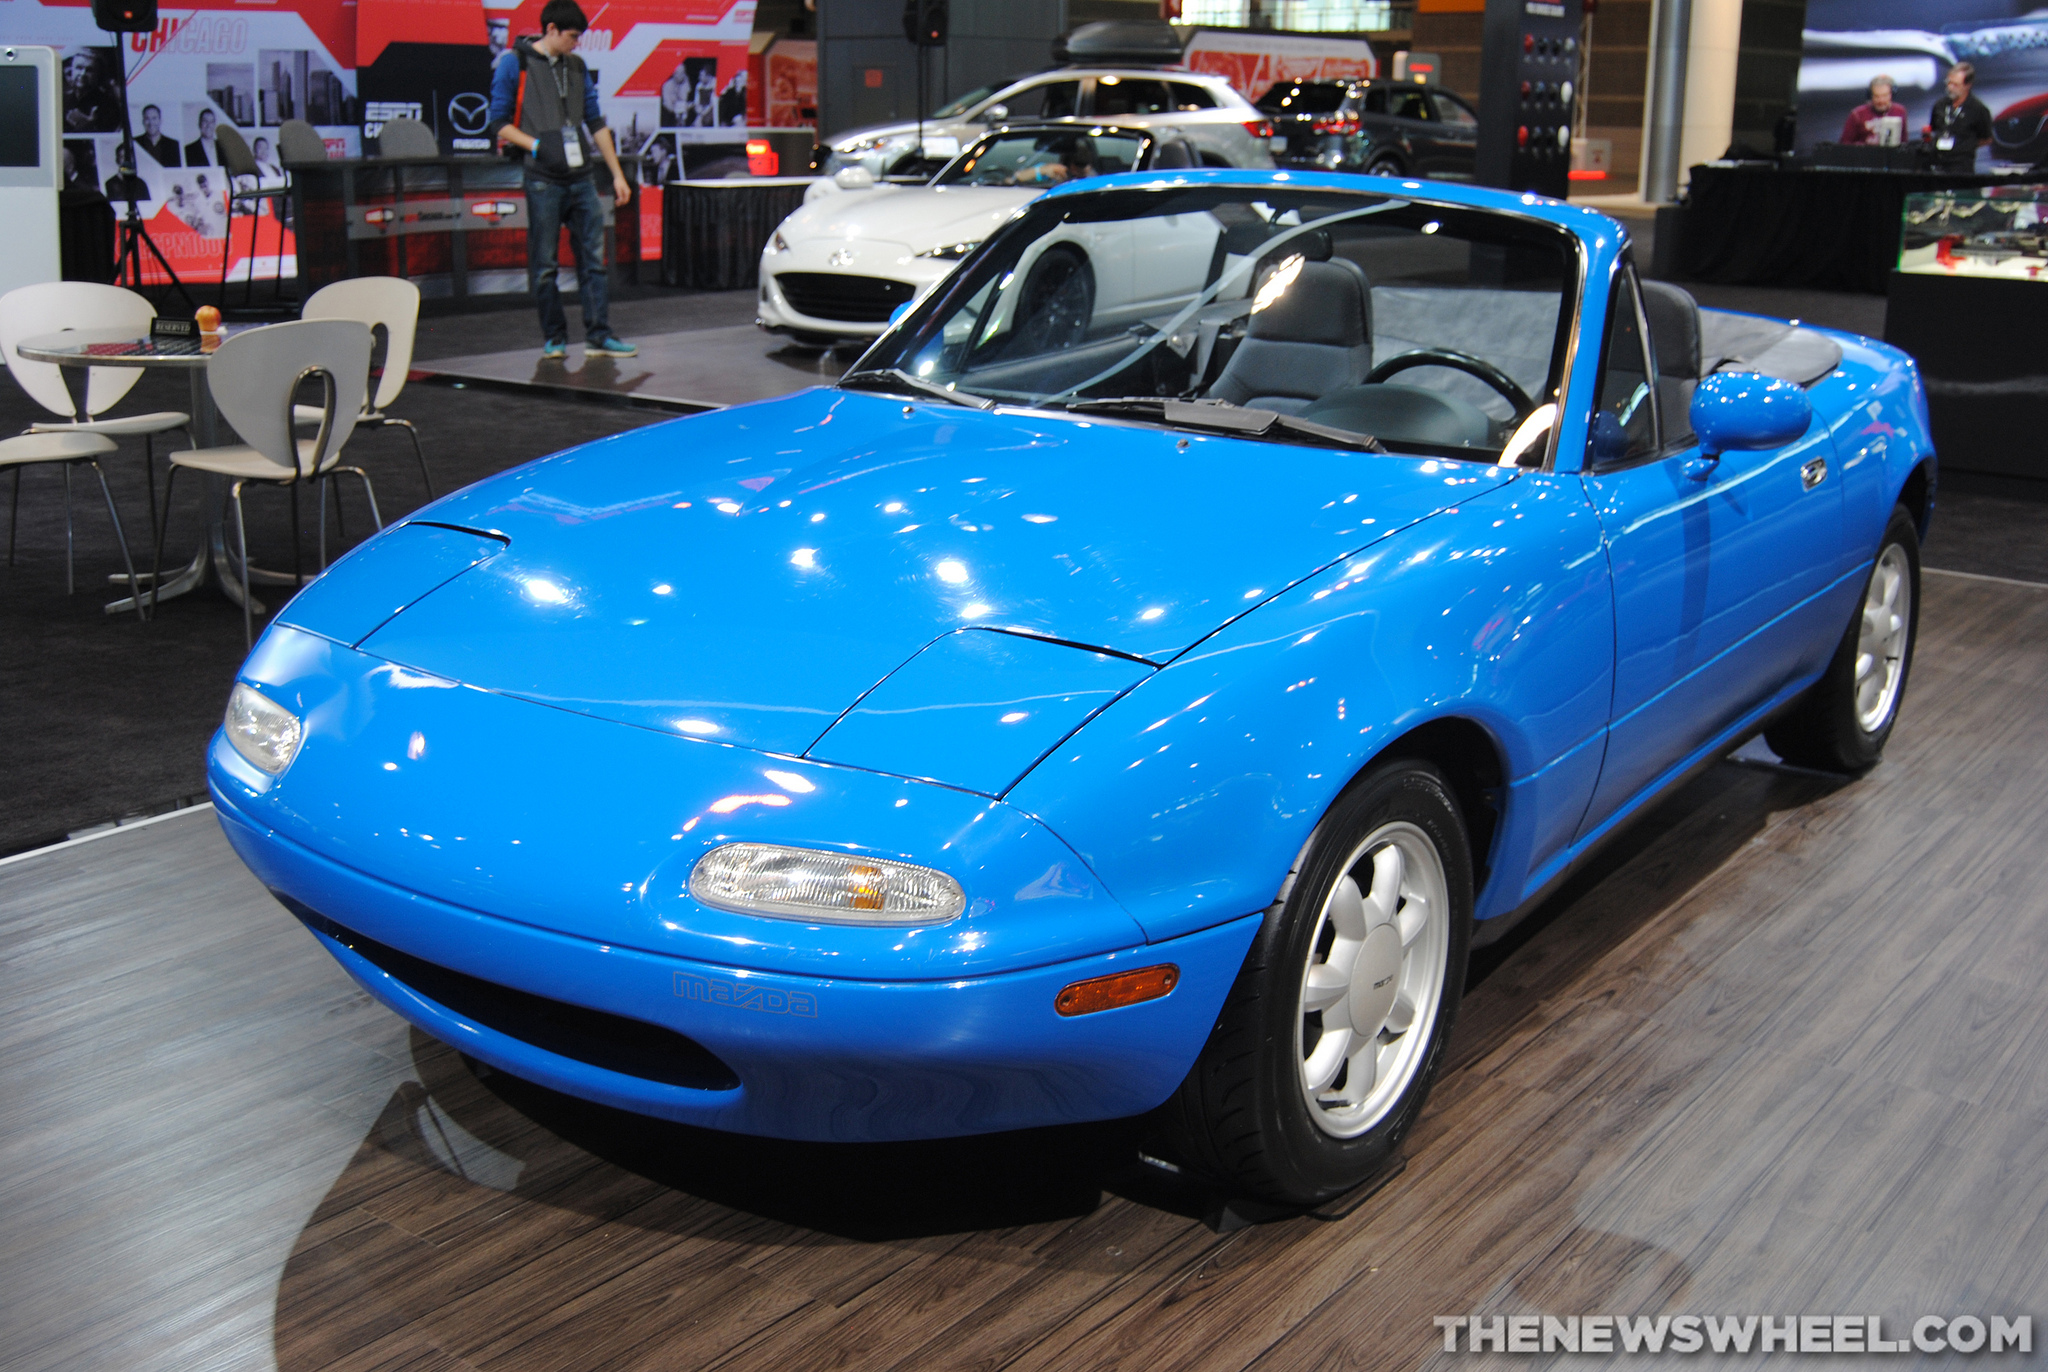 History of the Iconic Mazda MX-5 Wantagh